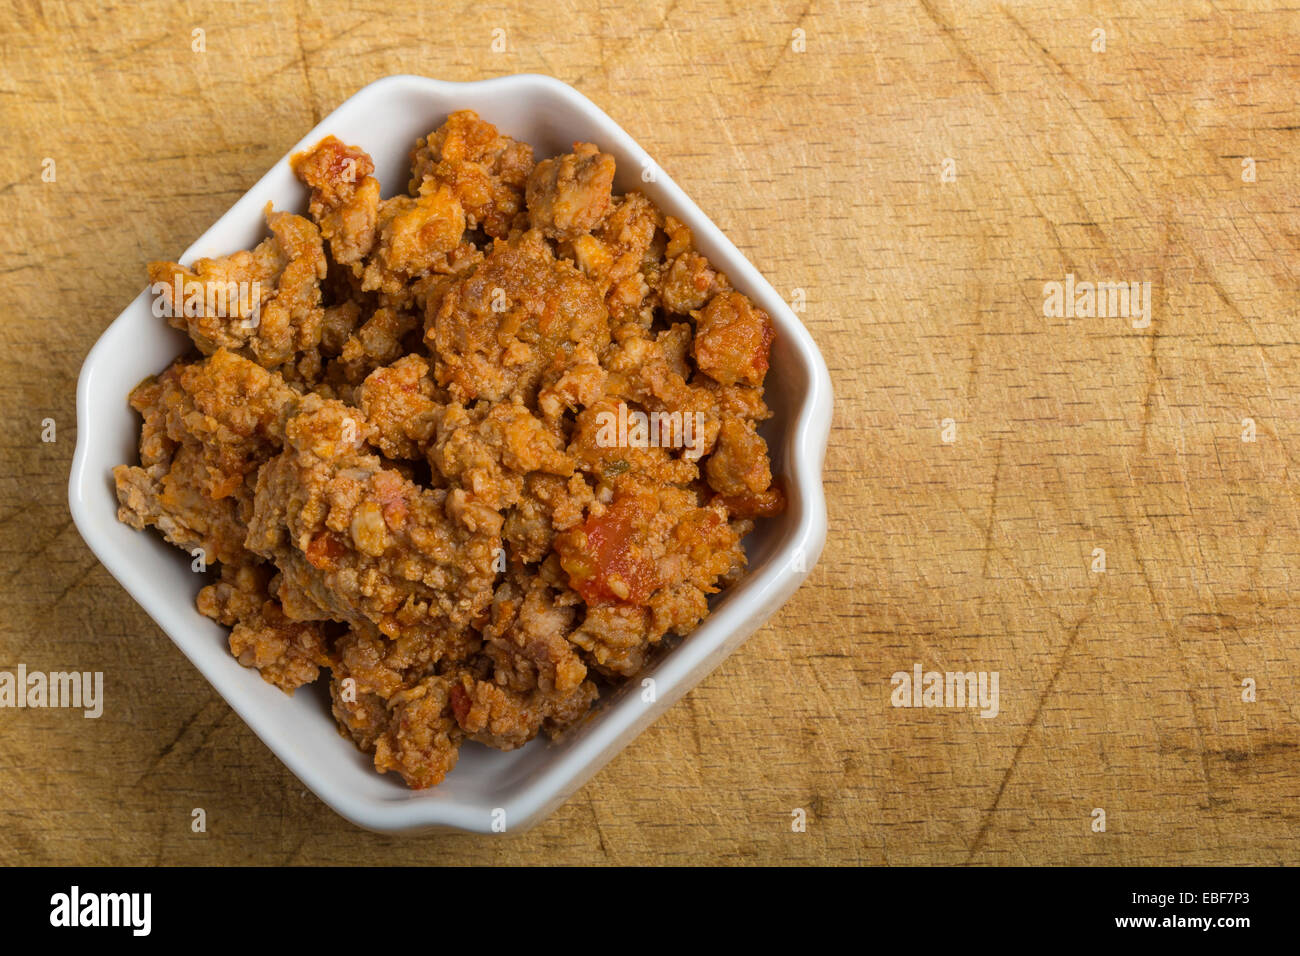 Bolognese sauce for spaghetti, odew wood background Stock Photo